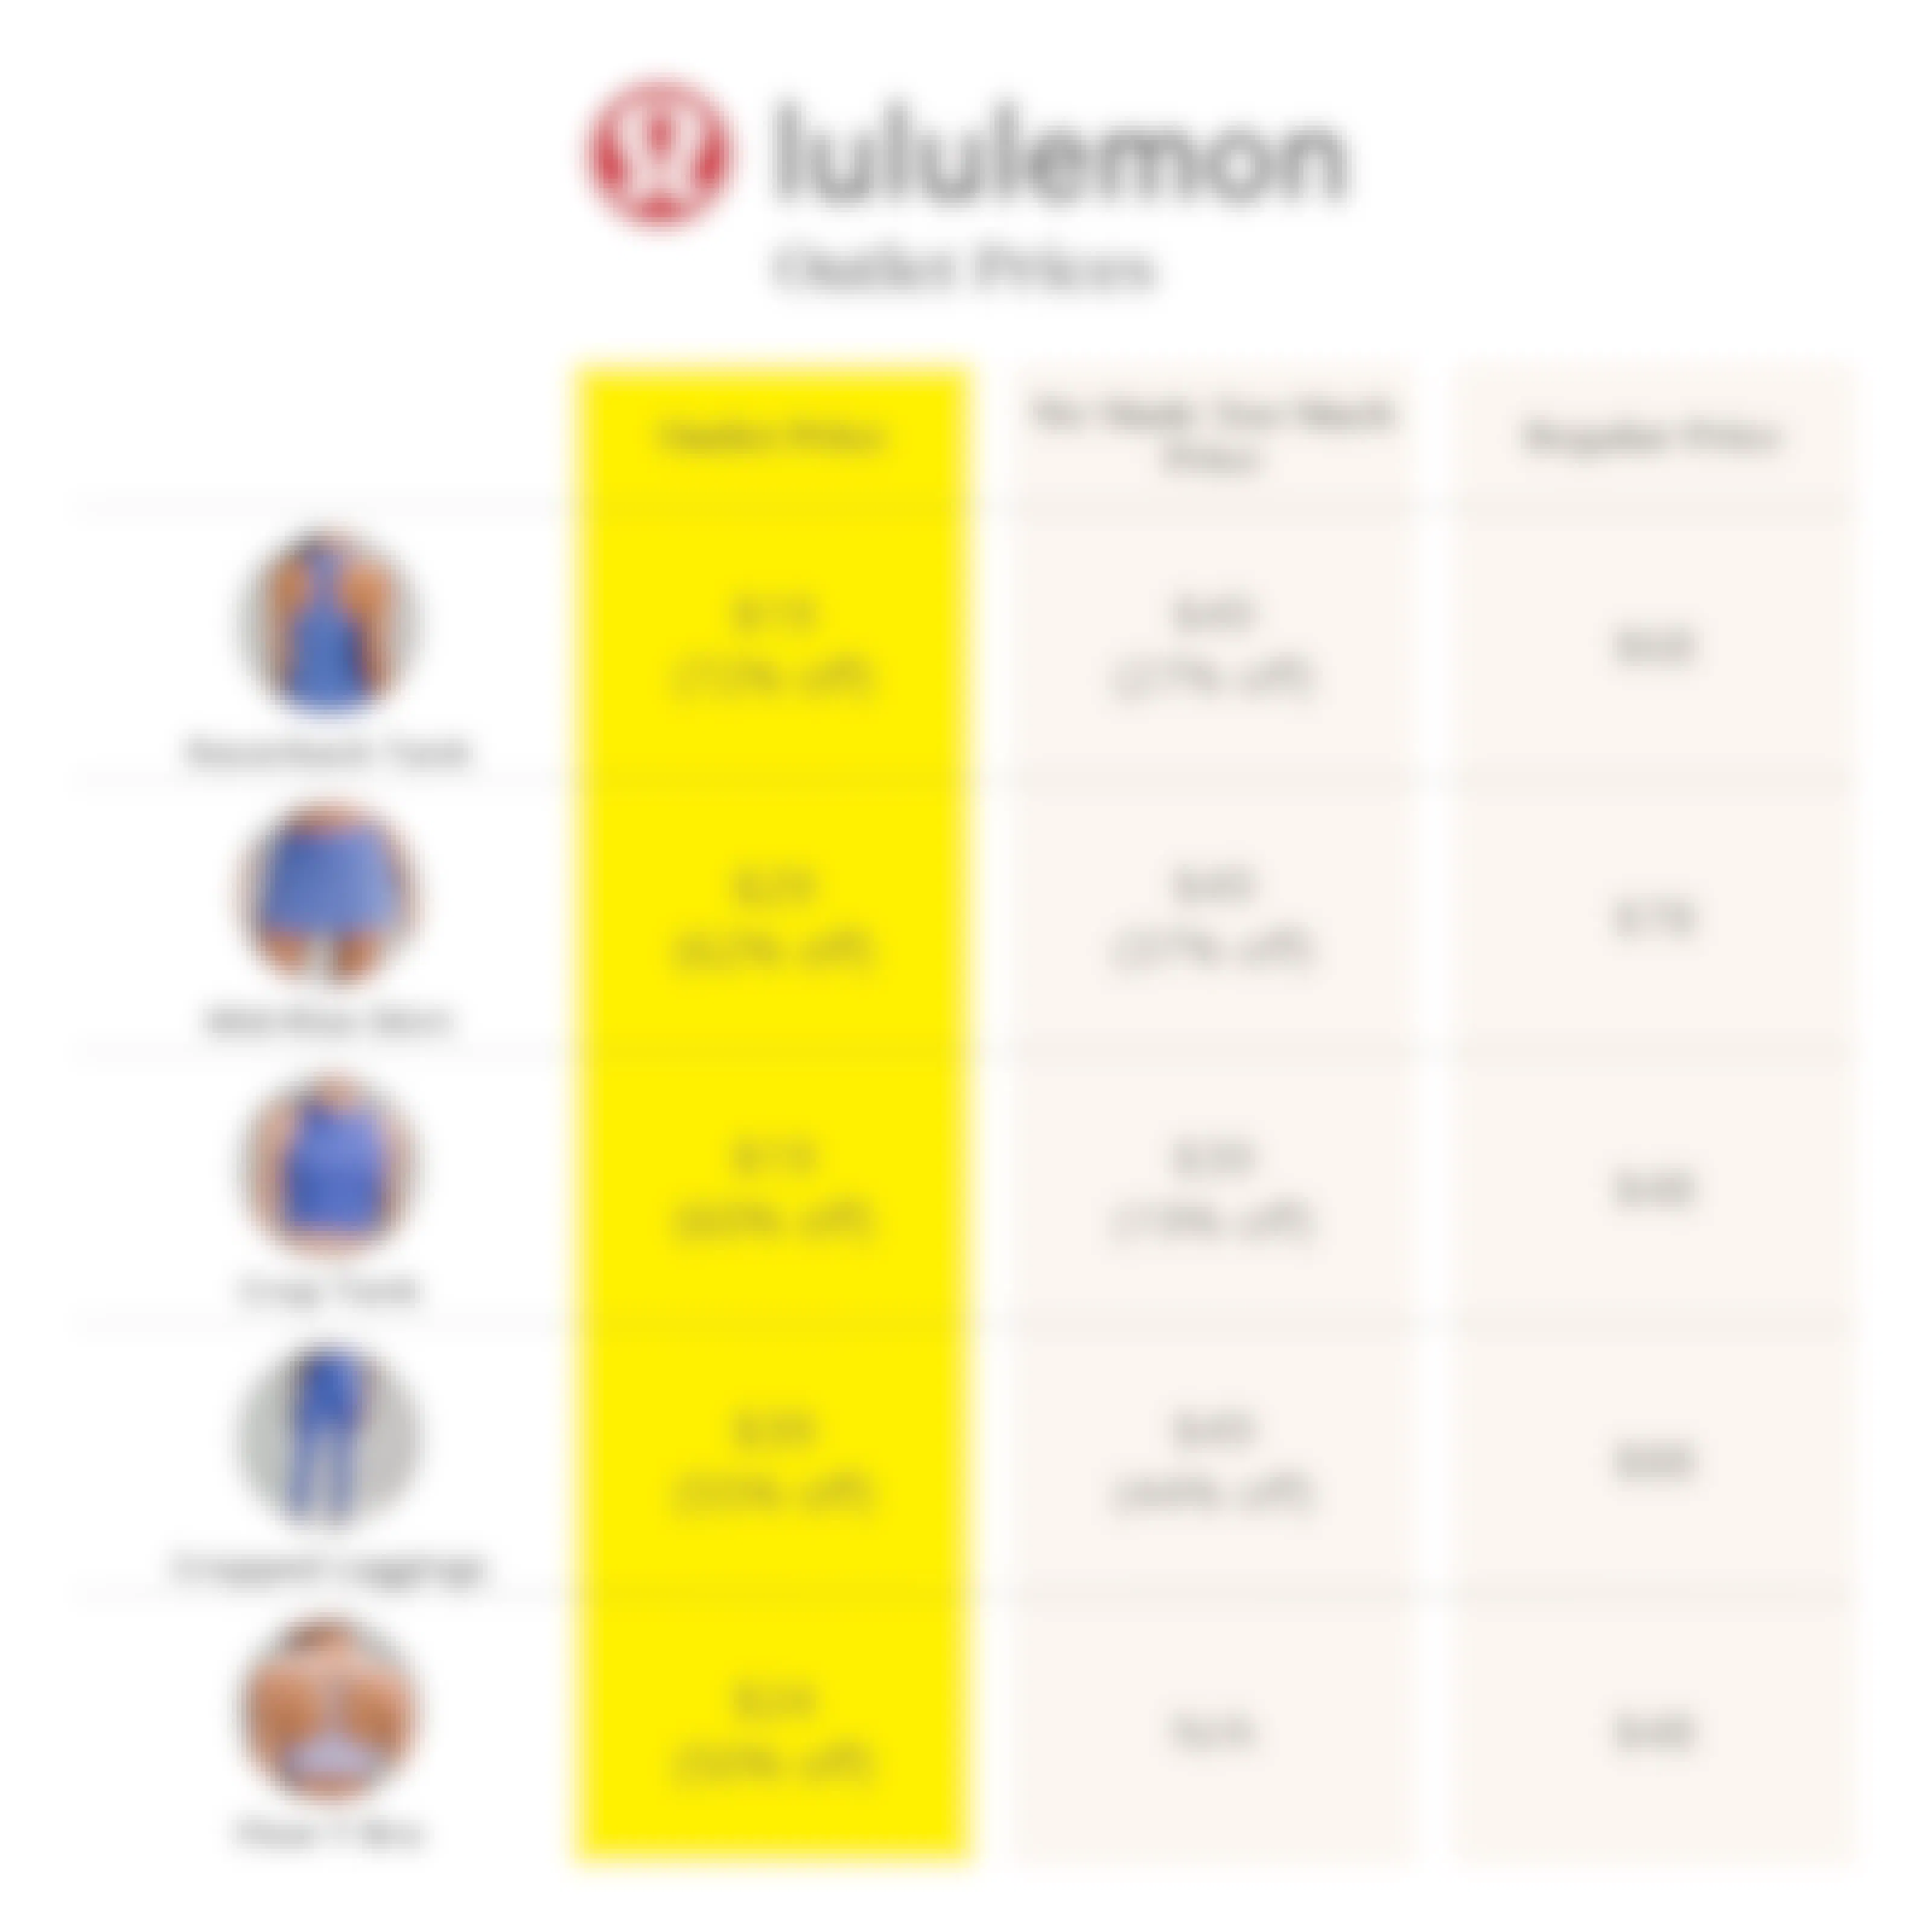 Lululemon Outlet prices compared to regular prices and We Made Too Much savings.